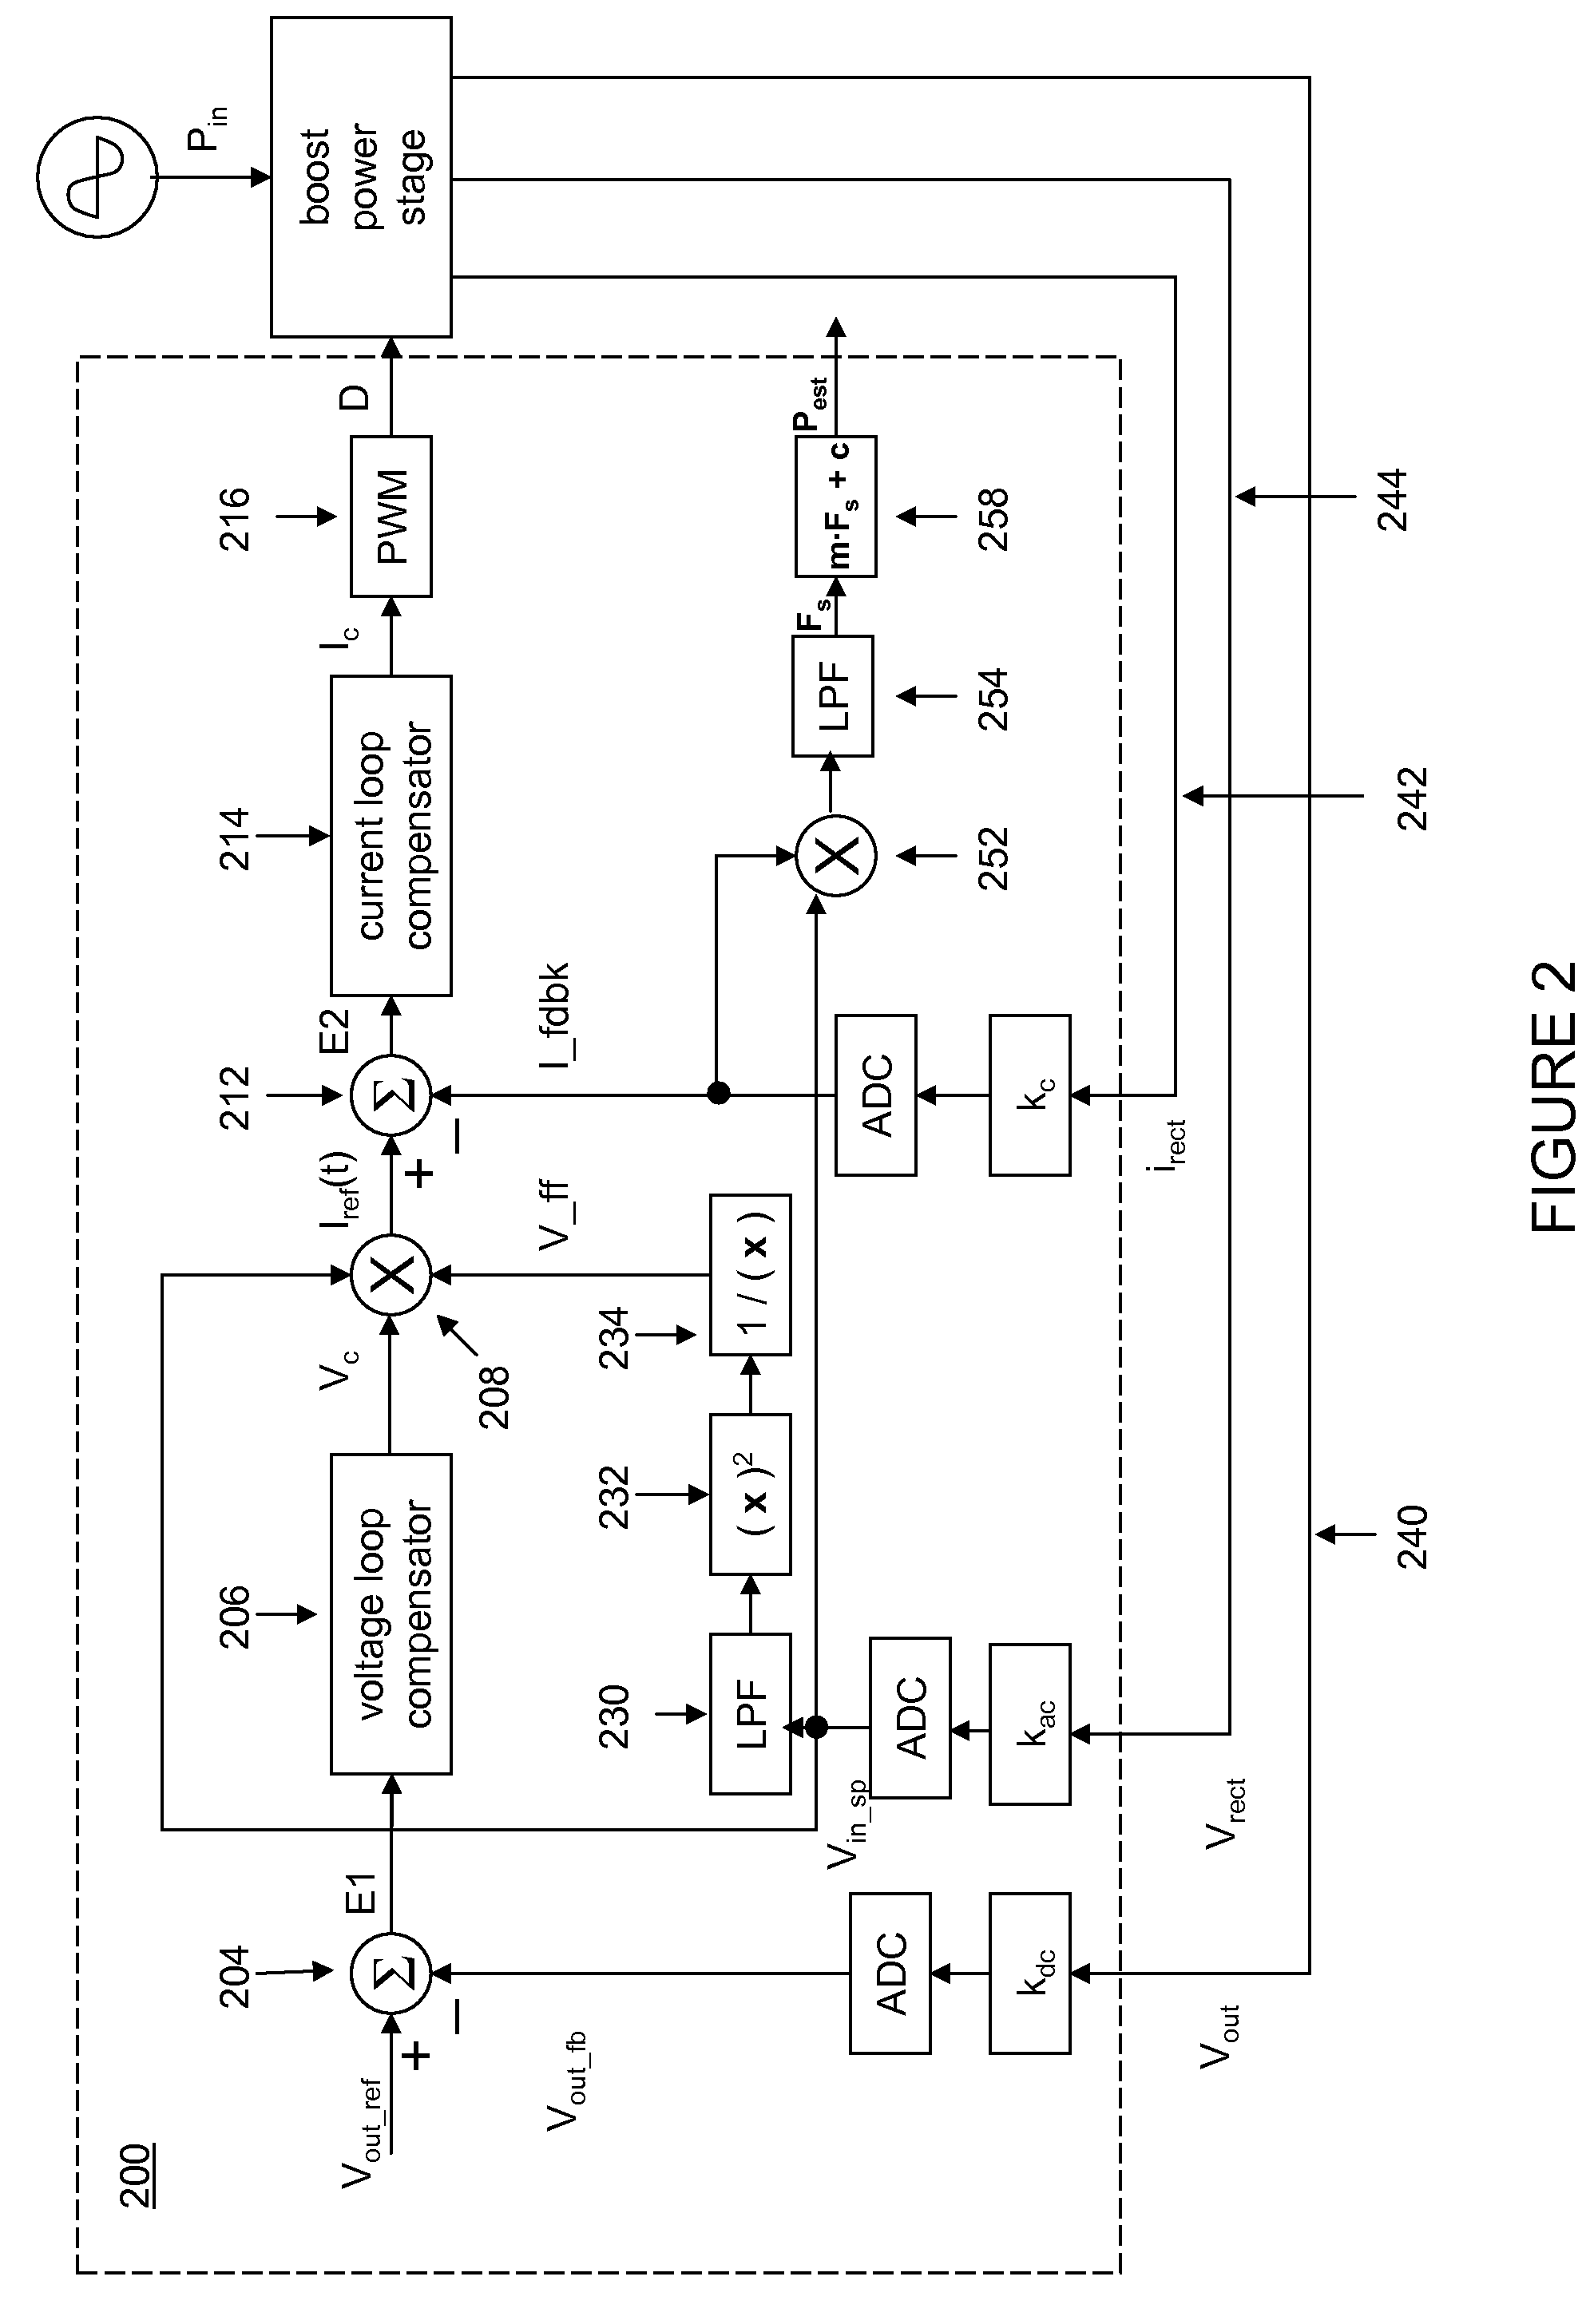 System and Method for Estimating Input Power for a Power Processing Circuit